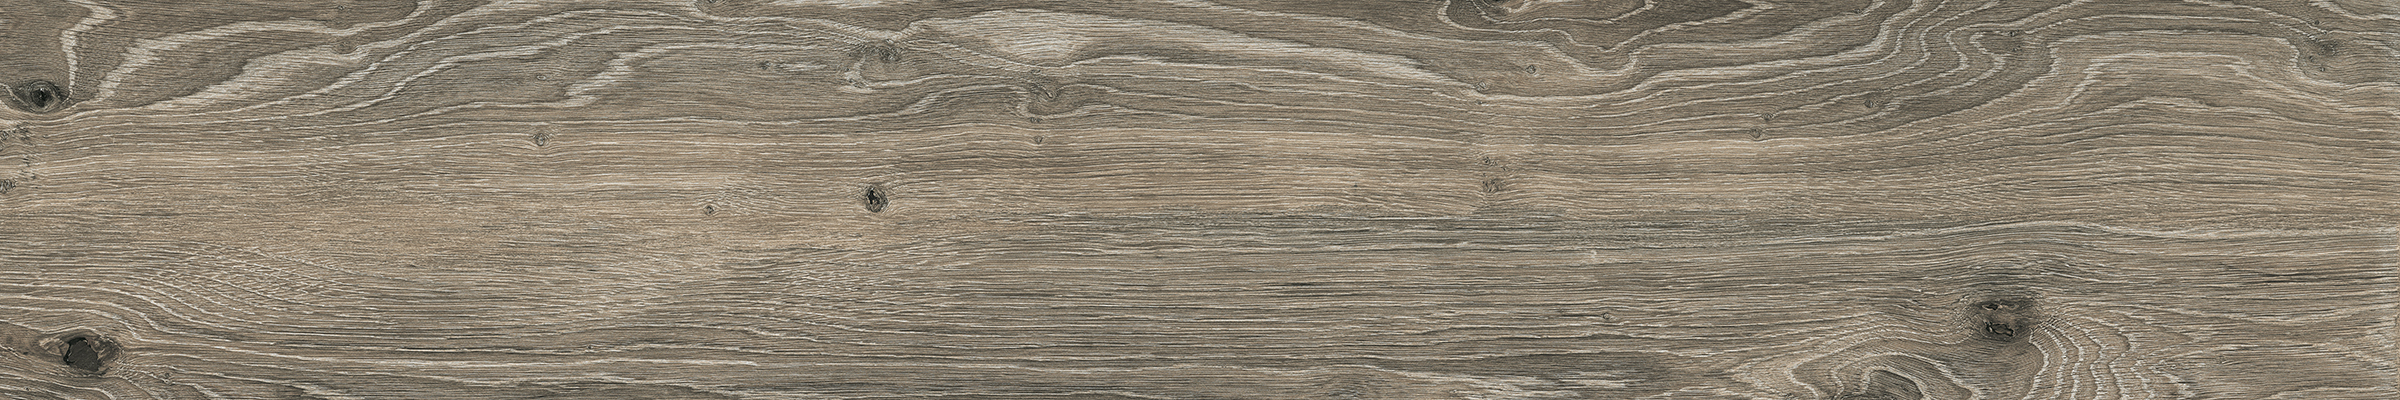 Novabell Eiche Timber Naturale ECH61RT 20x120cm rectified 9mm